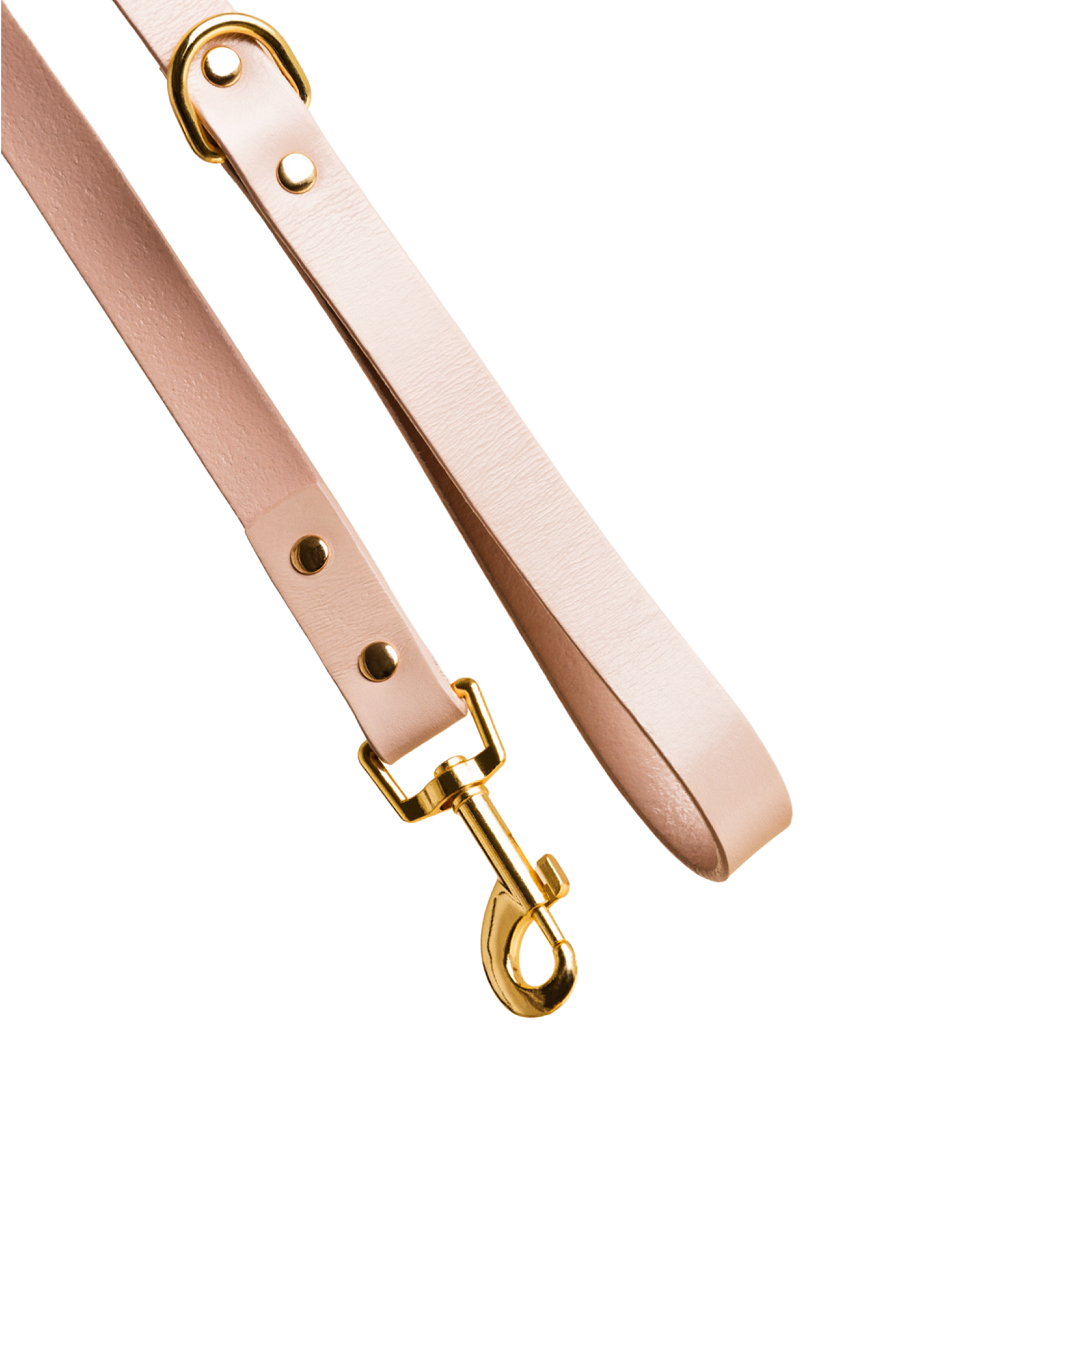 Ollie and James dog lead in blush pink leather